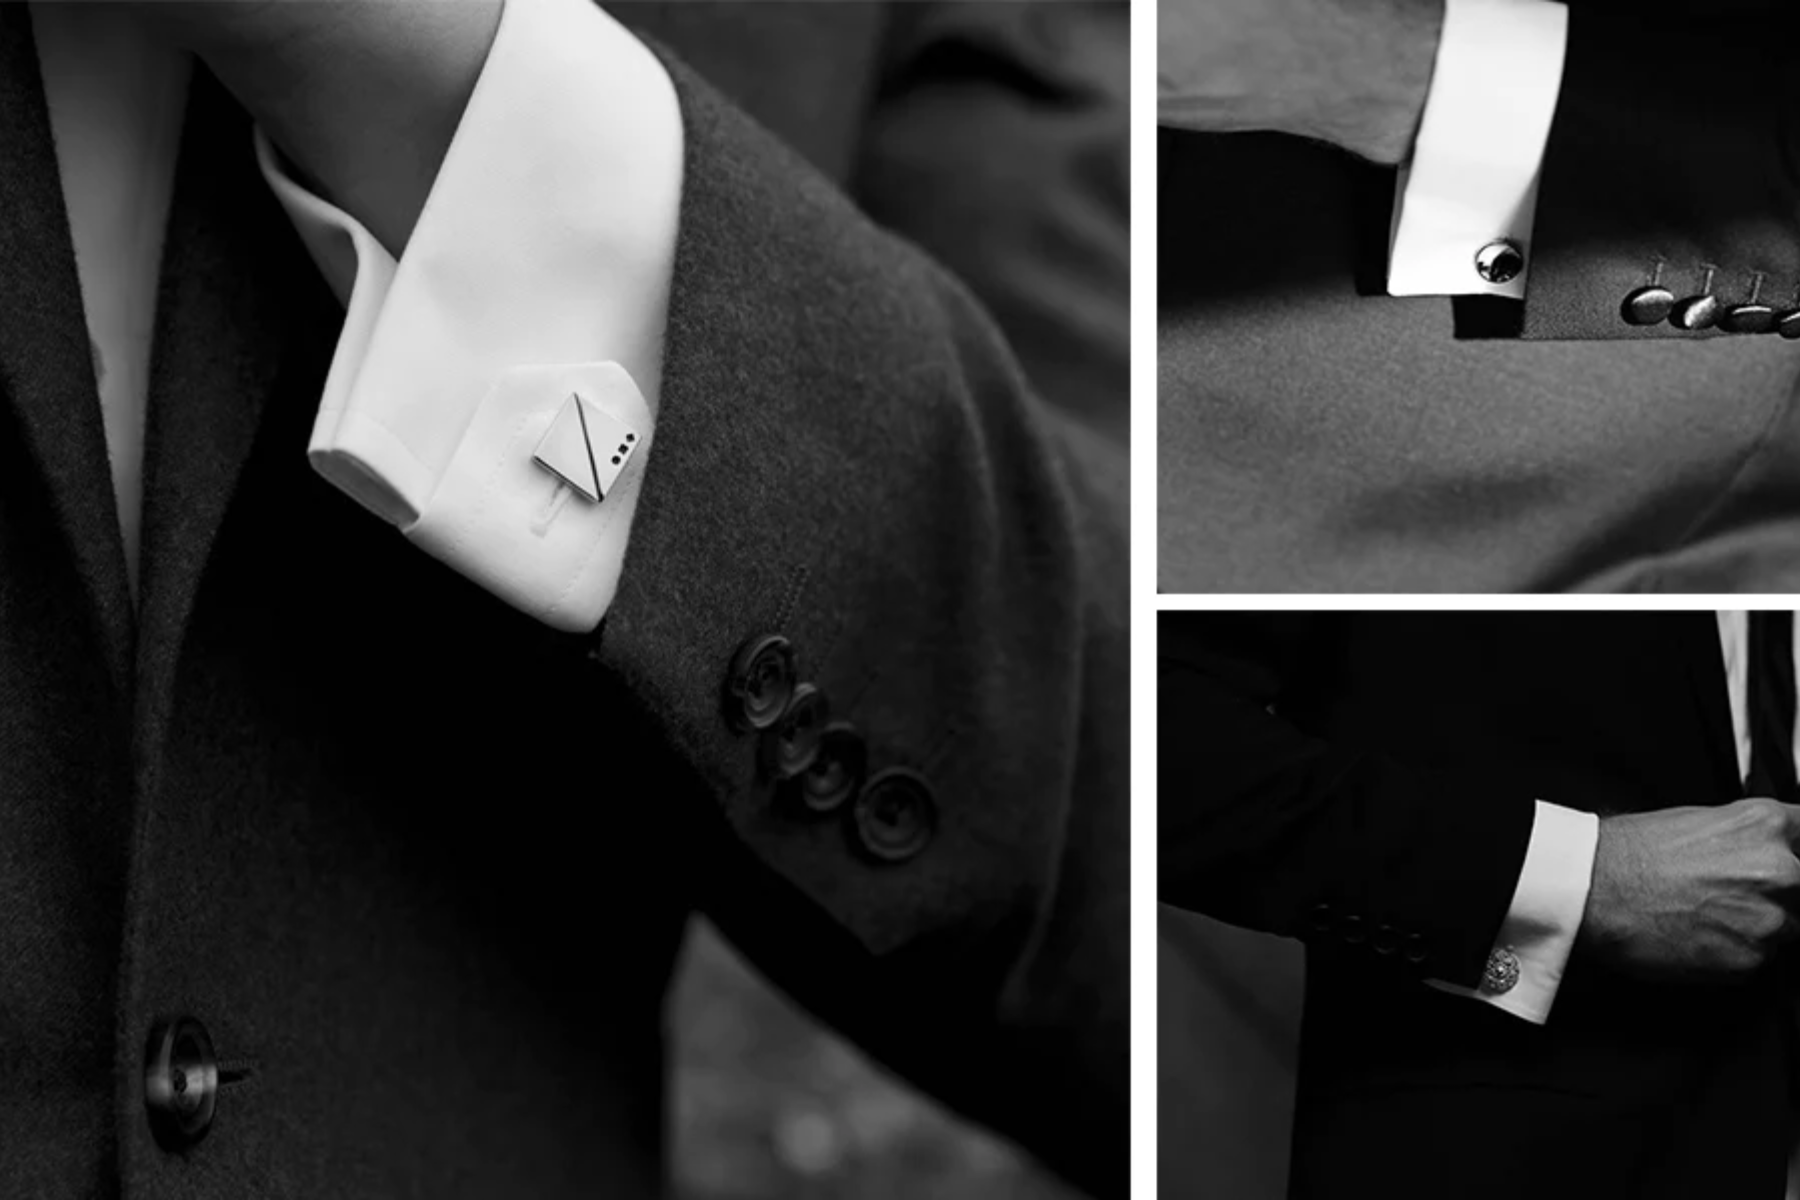 History Of Cufflinks - How Do These Tiny Little Accessories Change Men's Fashion?